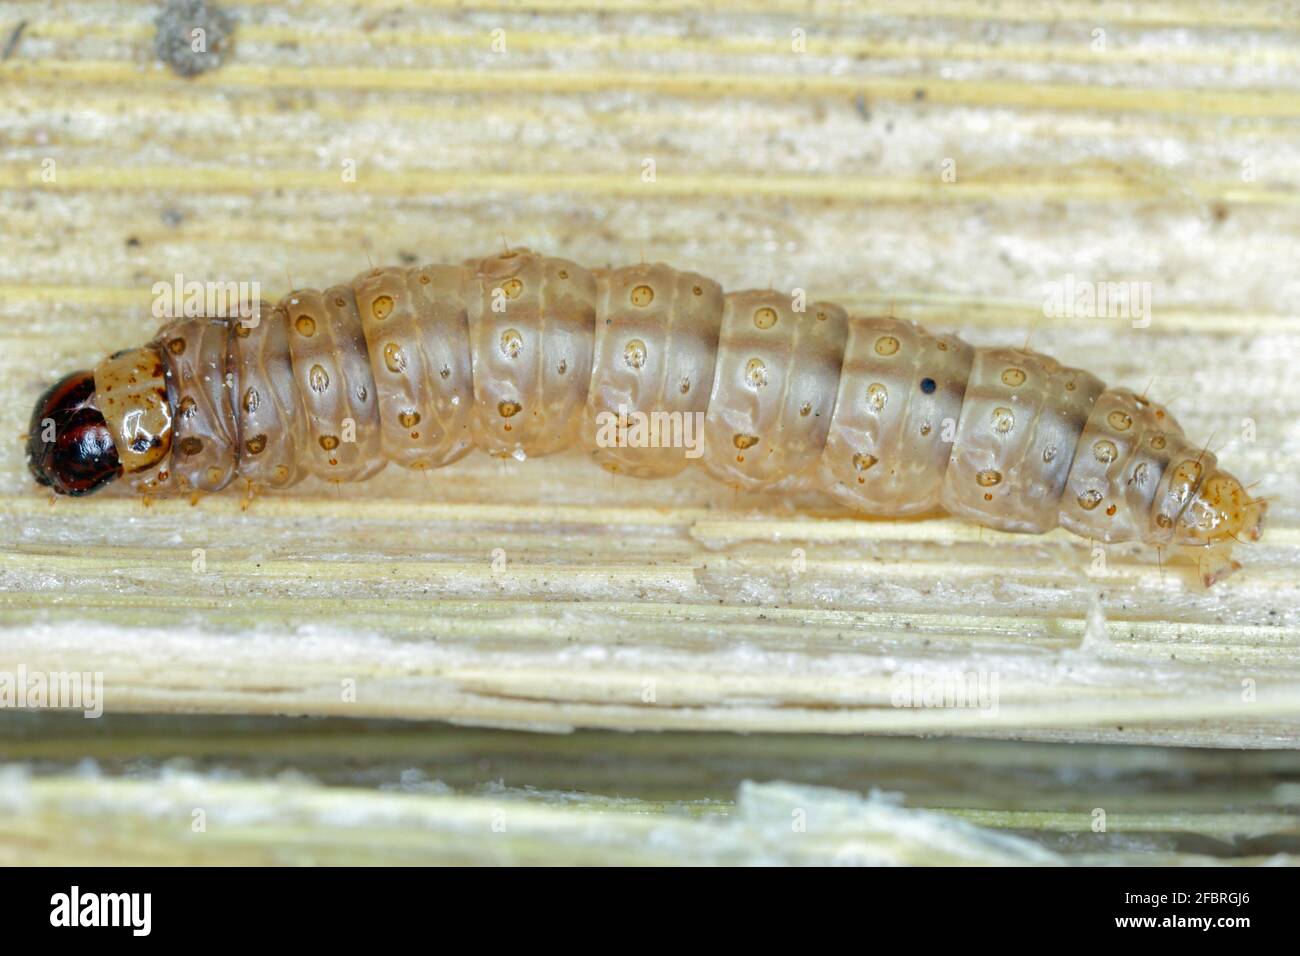 Caterpillar of The European corn borer or borer or high-flyer (Ostrinia nubilalis) on corn stalk. It is a moth of the family Crambidae. It is a one of Stock Photo